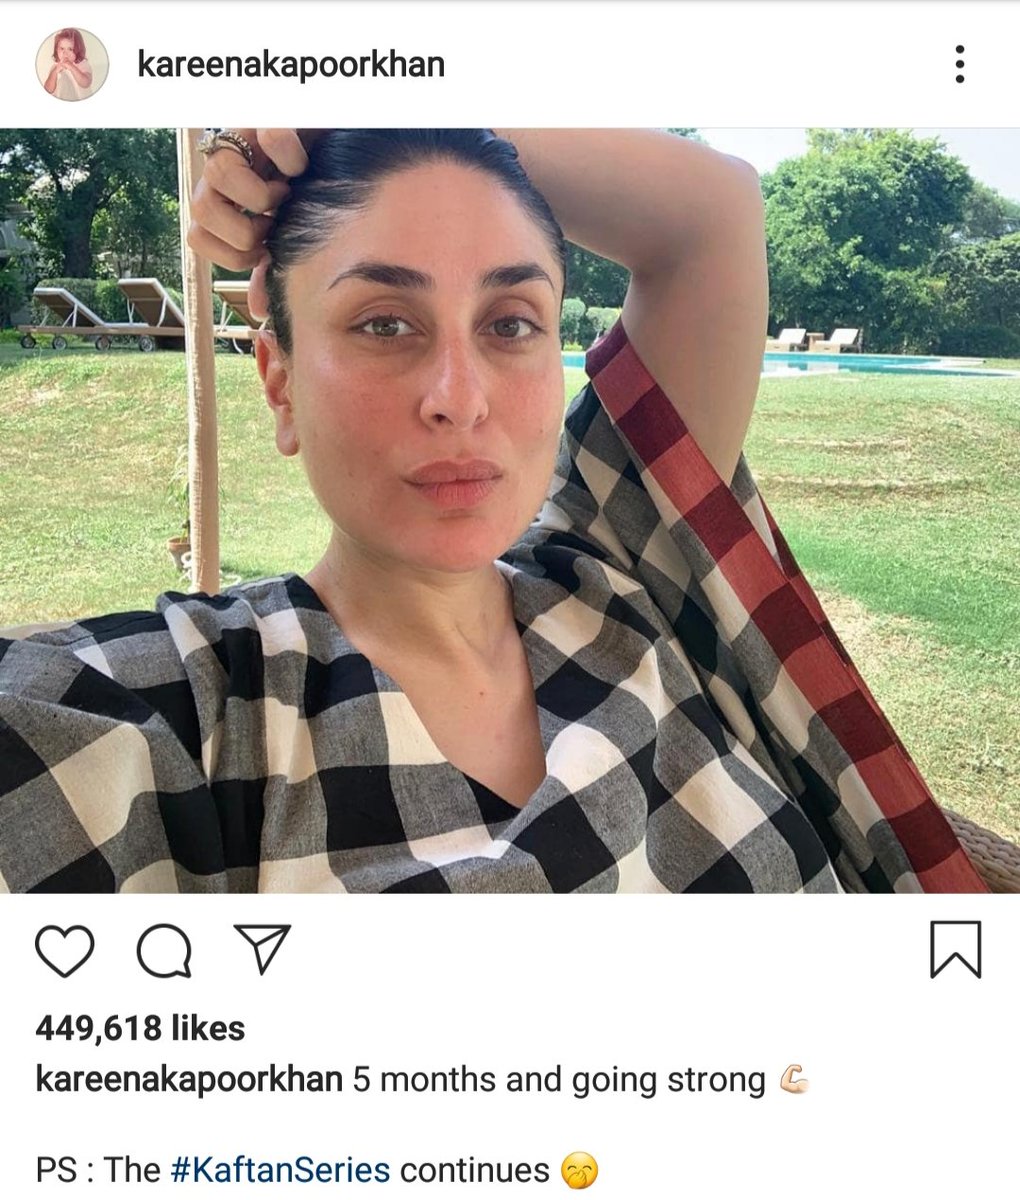 Kareena Kapoor. Then - Some gyaan on justice. Now - Busy promoting Kaftan series